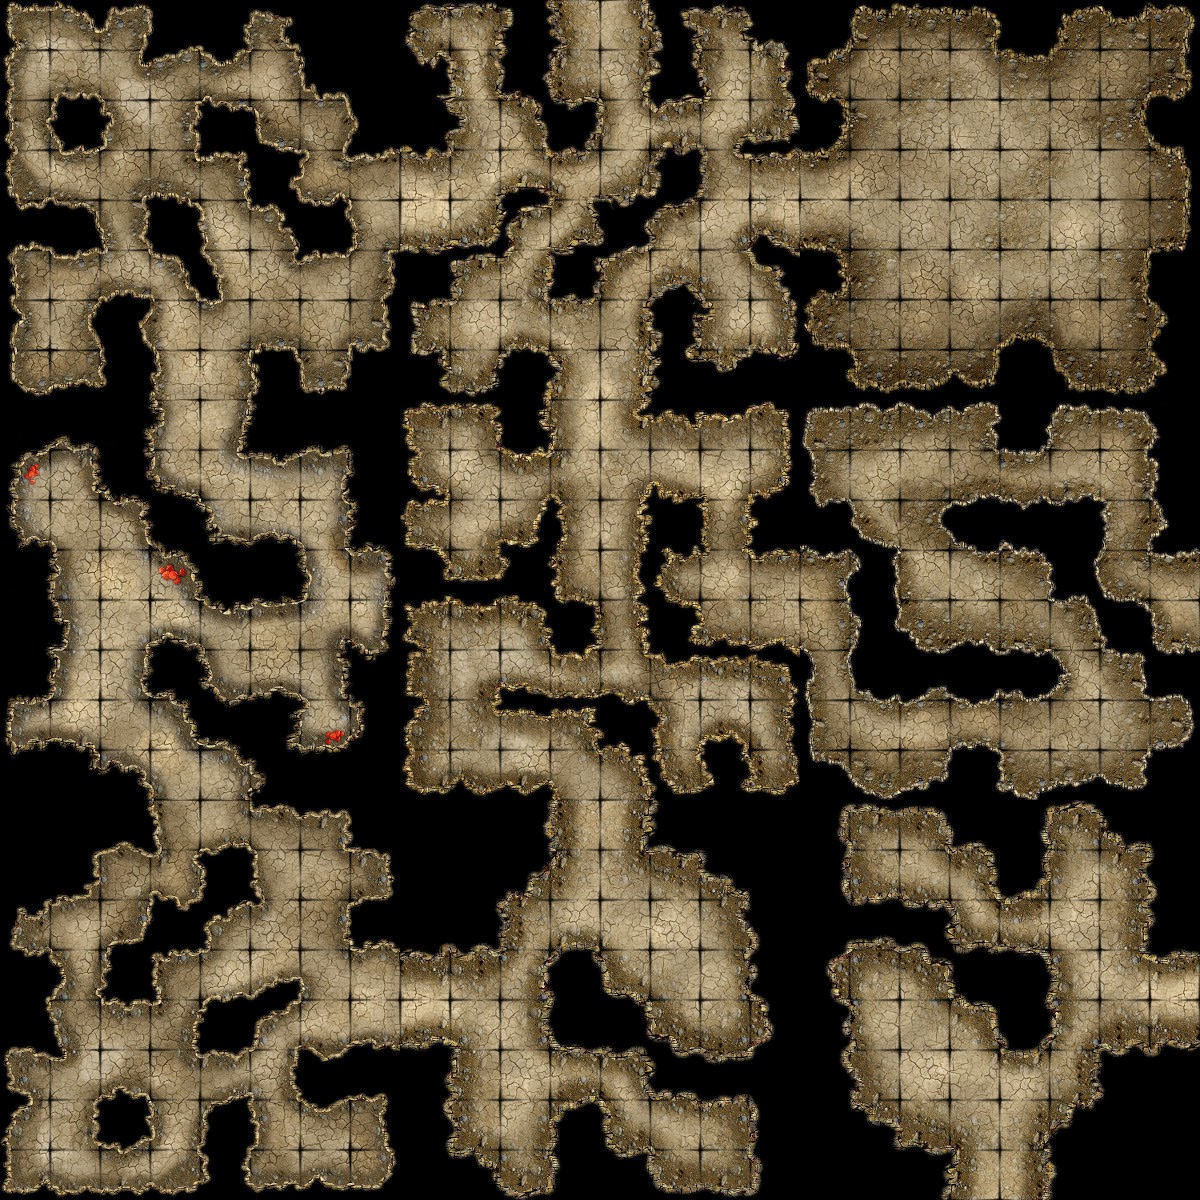 free-dungeon-tiles-to-print-exemple-d-agencement-des-cavernes-g-omorphes